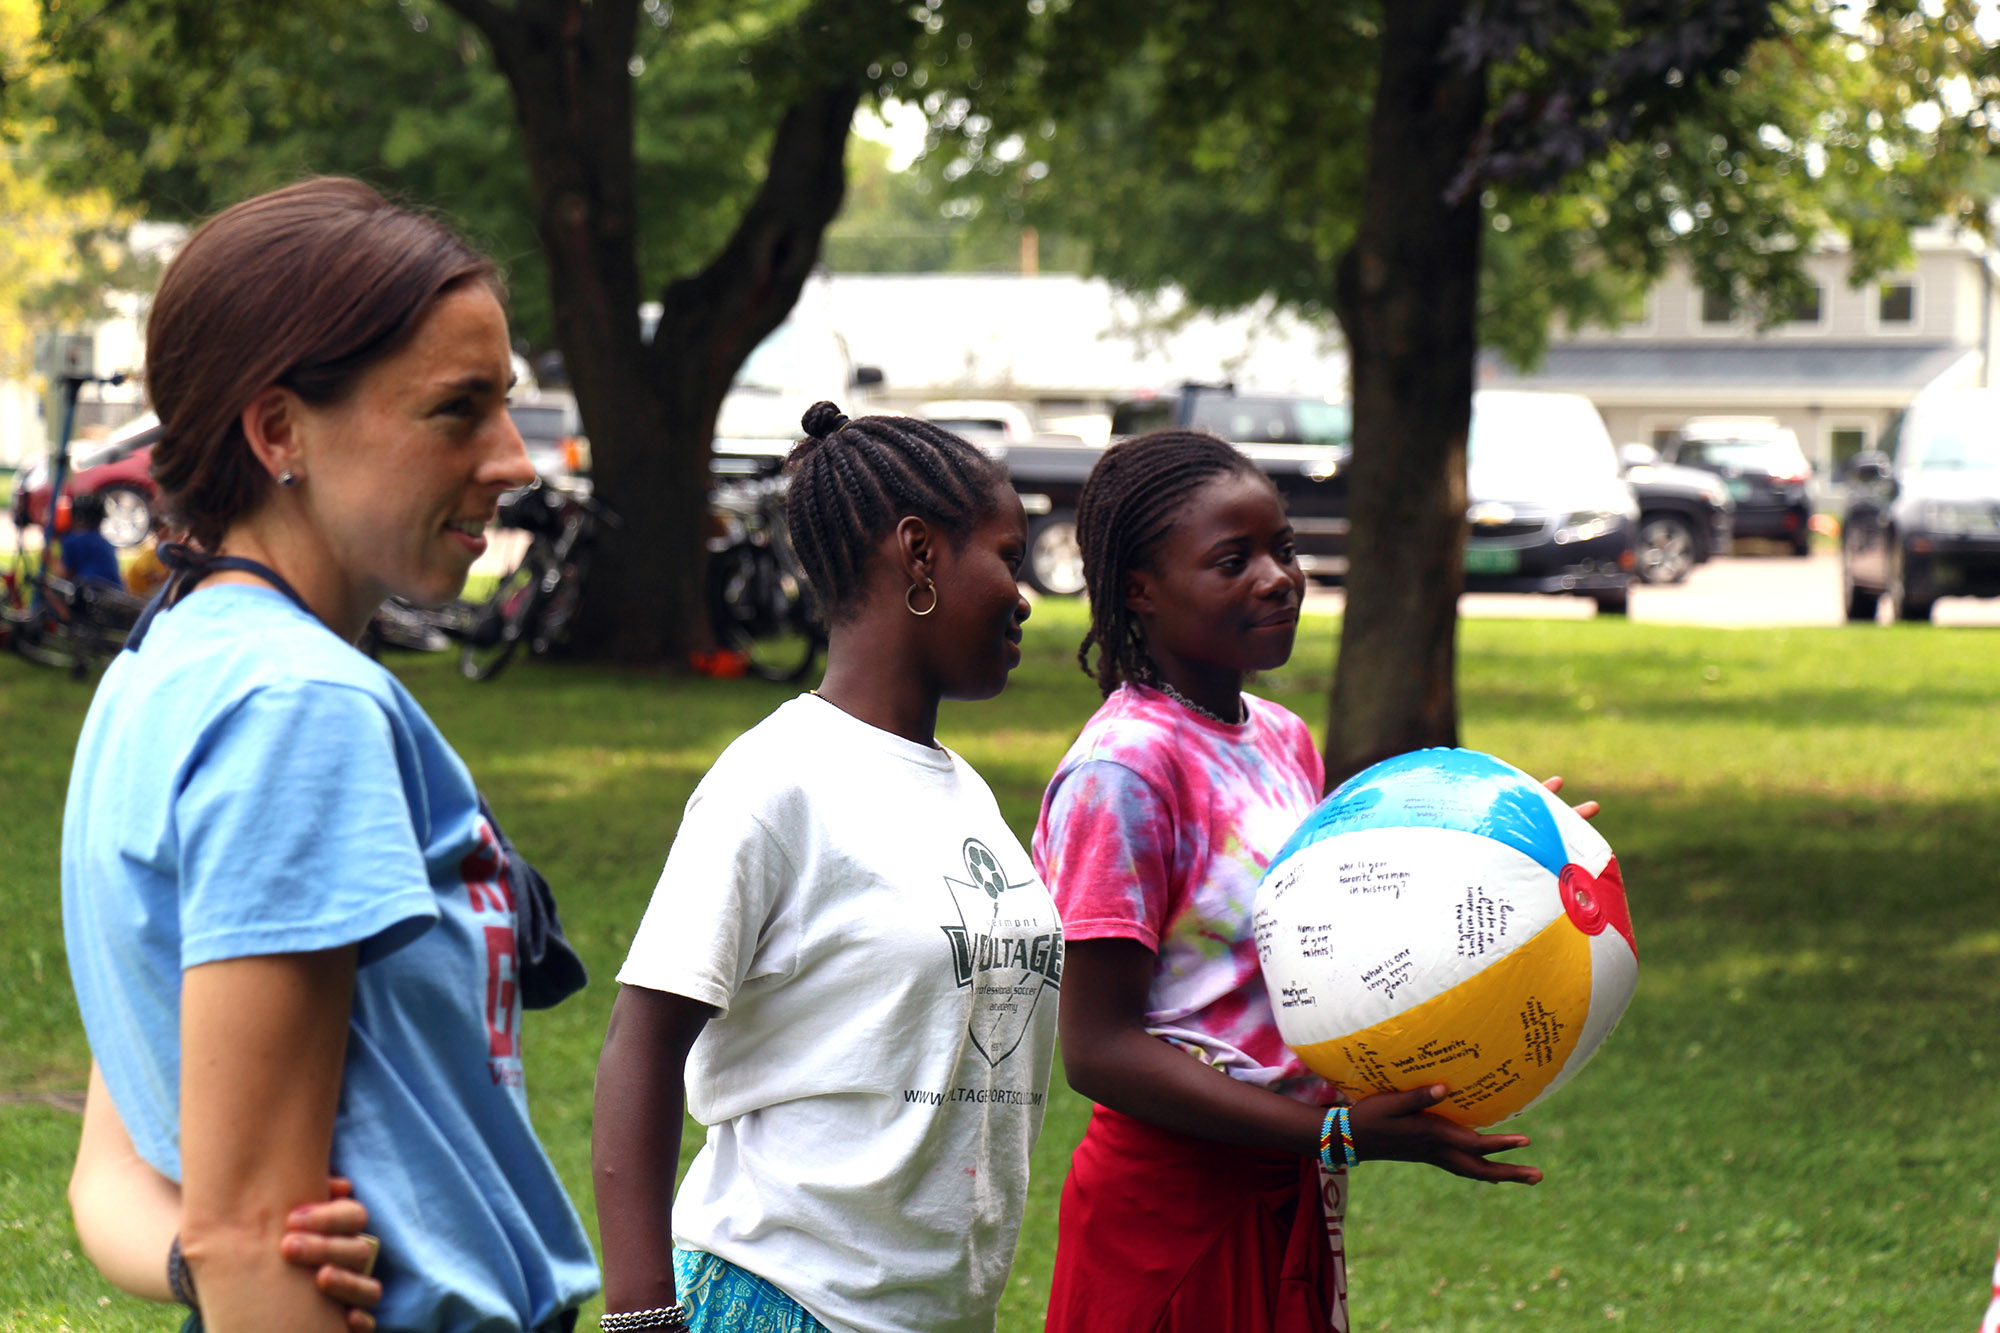 Campers hold beach volleyball during a getting-to-know you game at Rosie’s Girls summer camp.